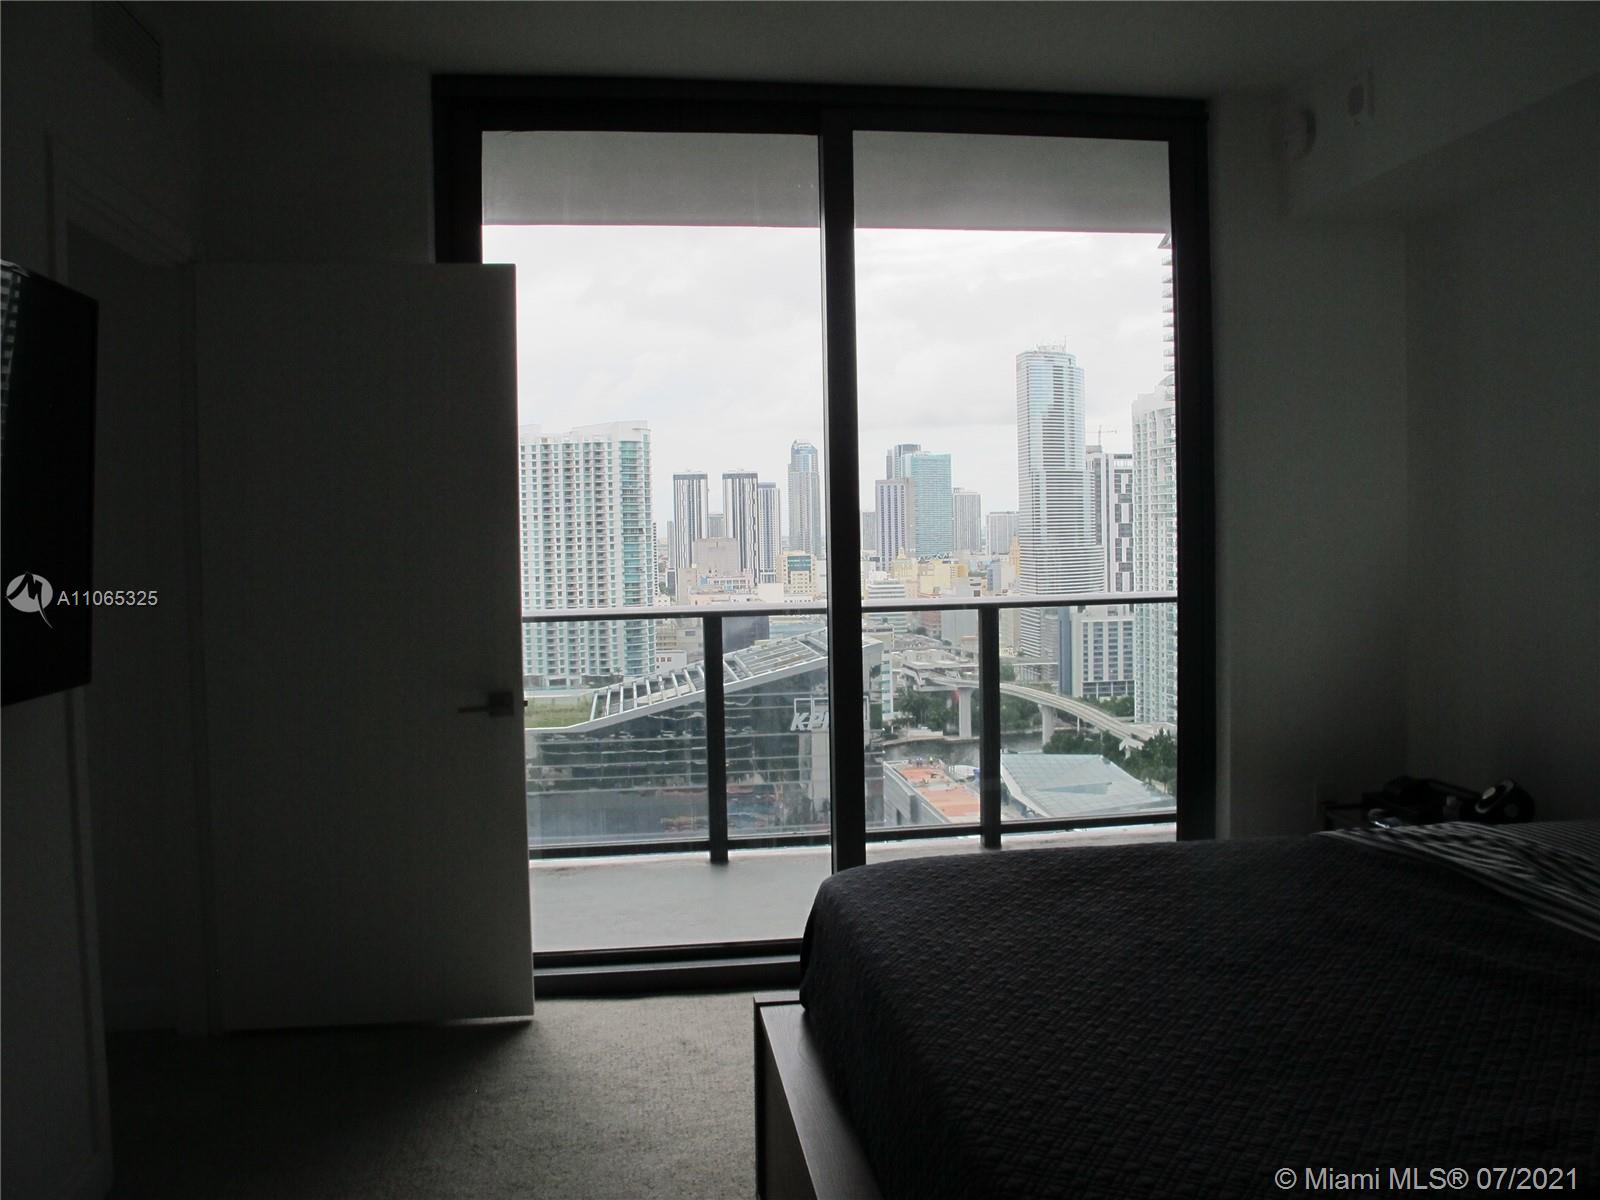 Brickell Heights East Tower image #7